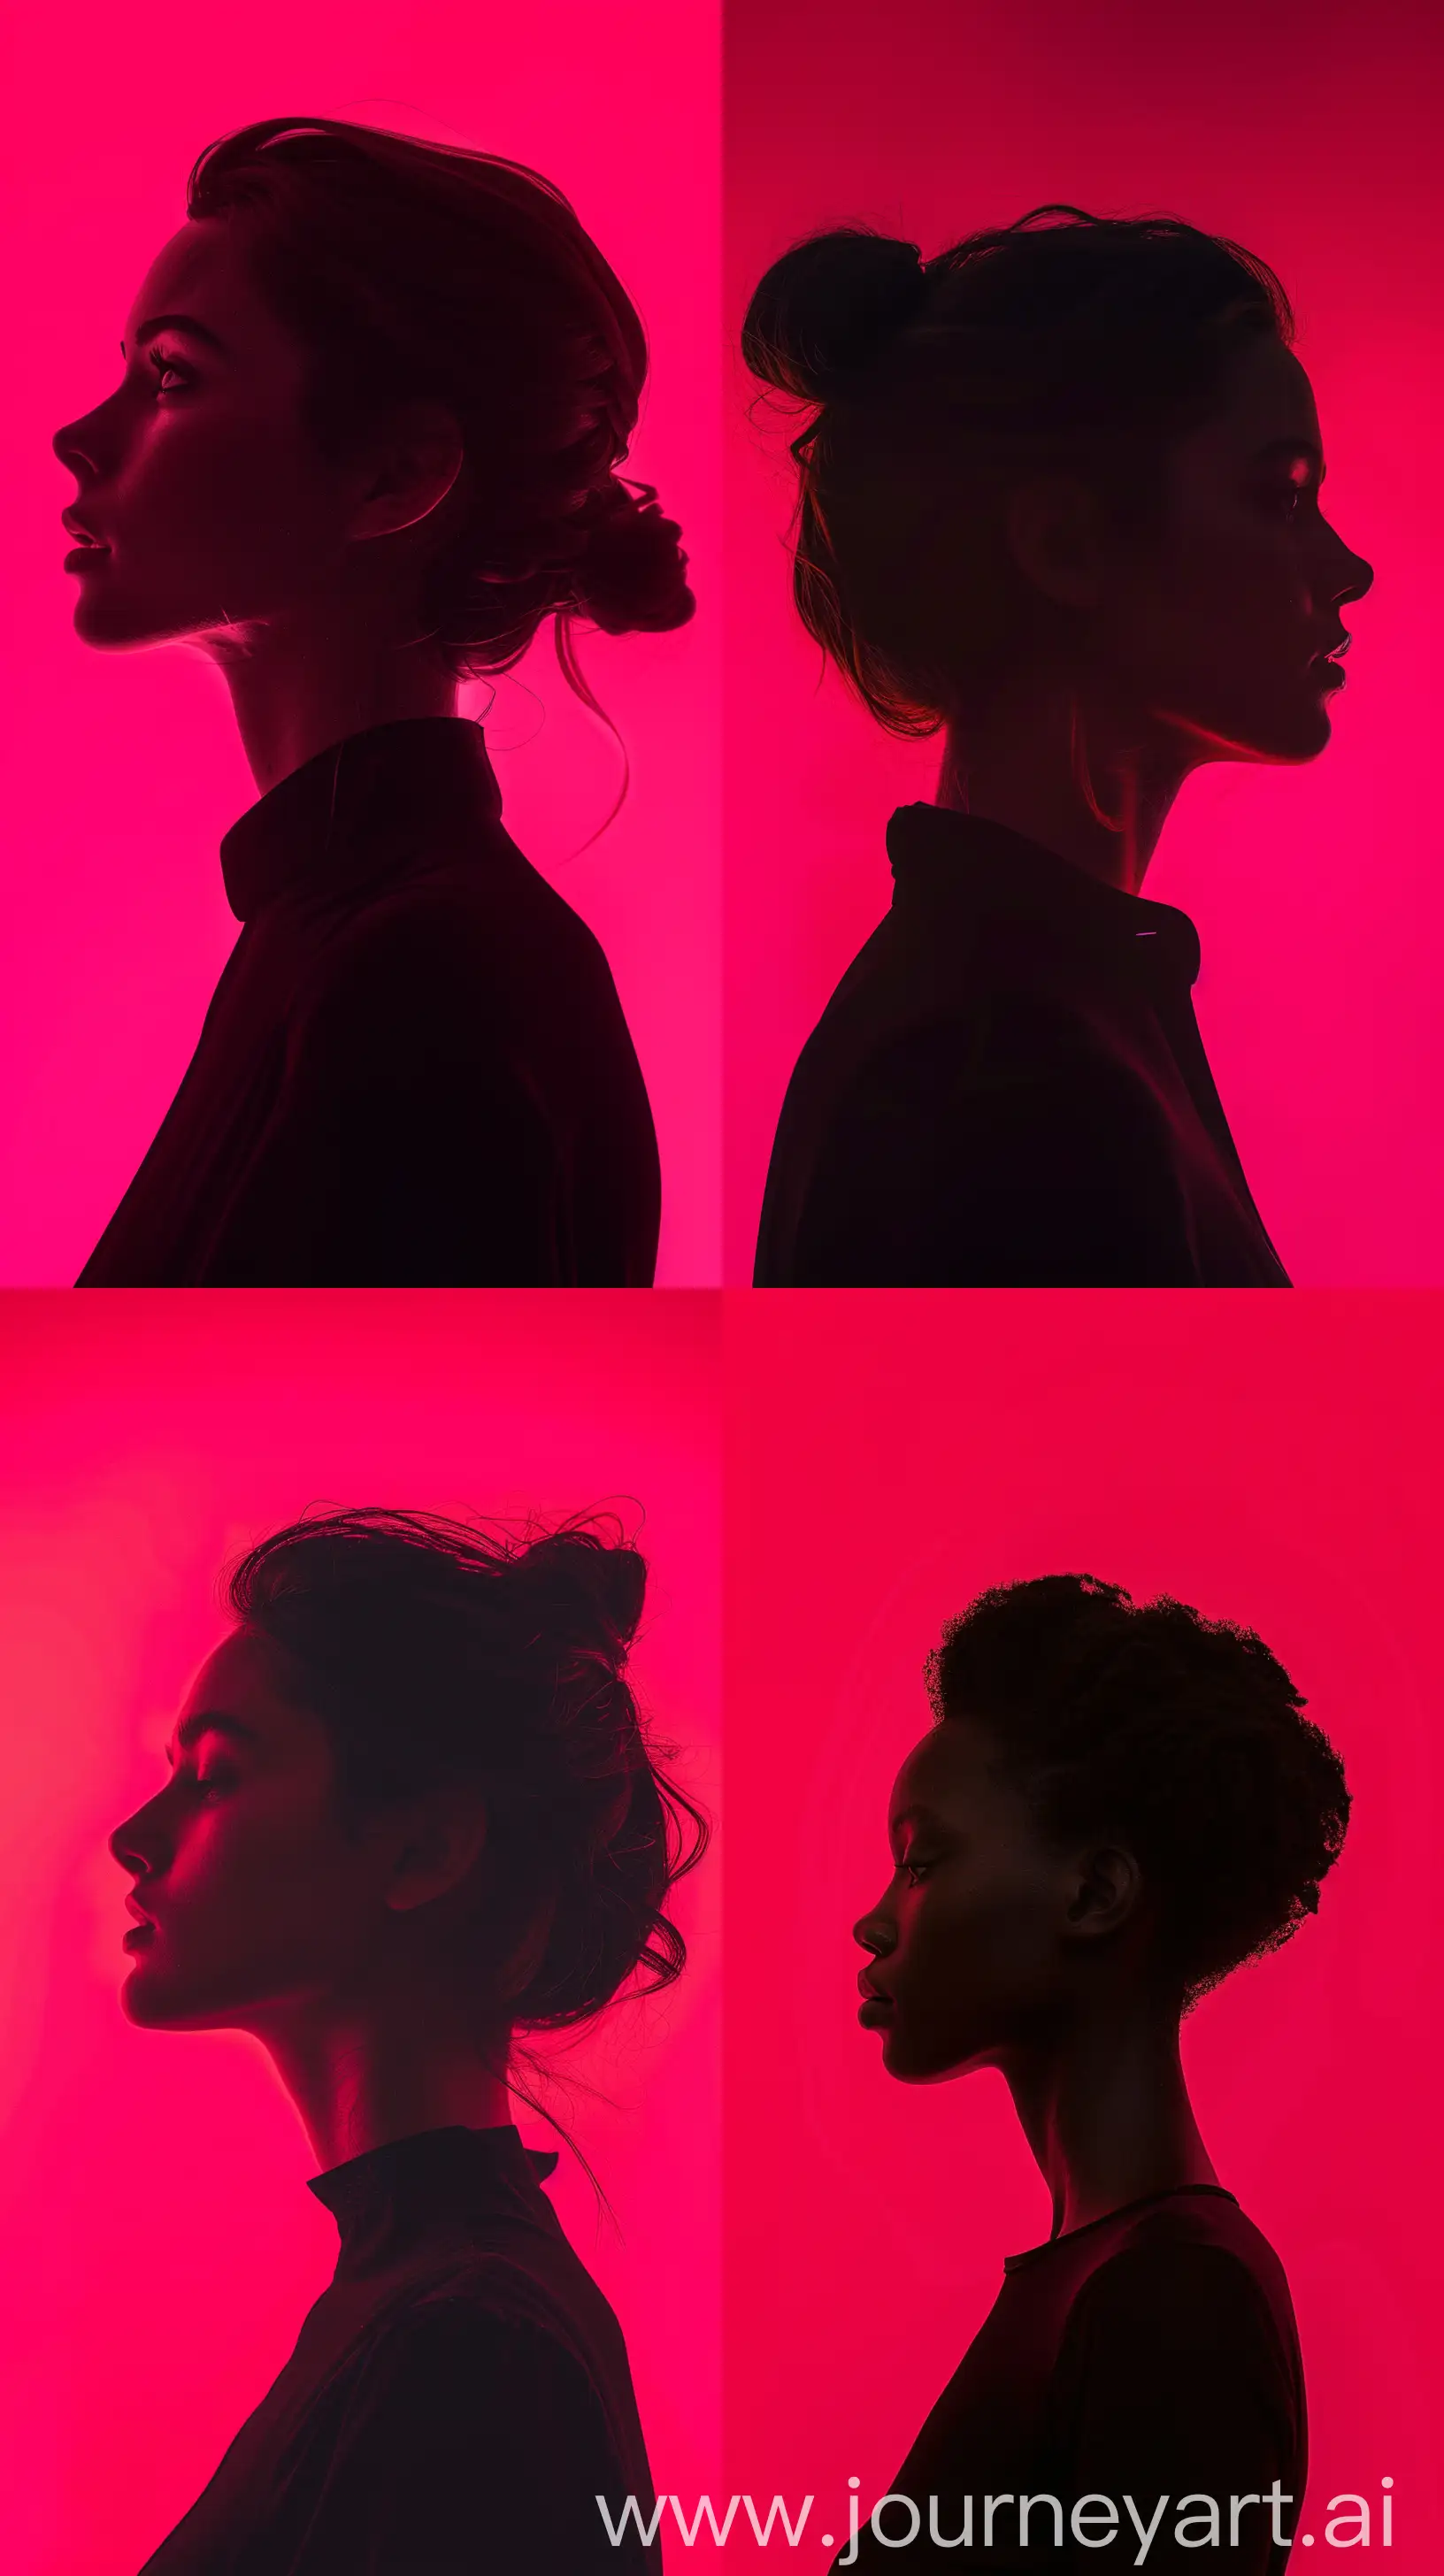 Vibrant-Silhouette-of-a-Woman-Against-Hot-Pink-Backdrop